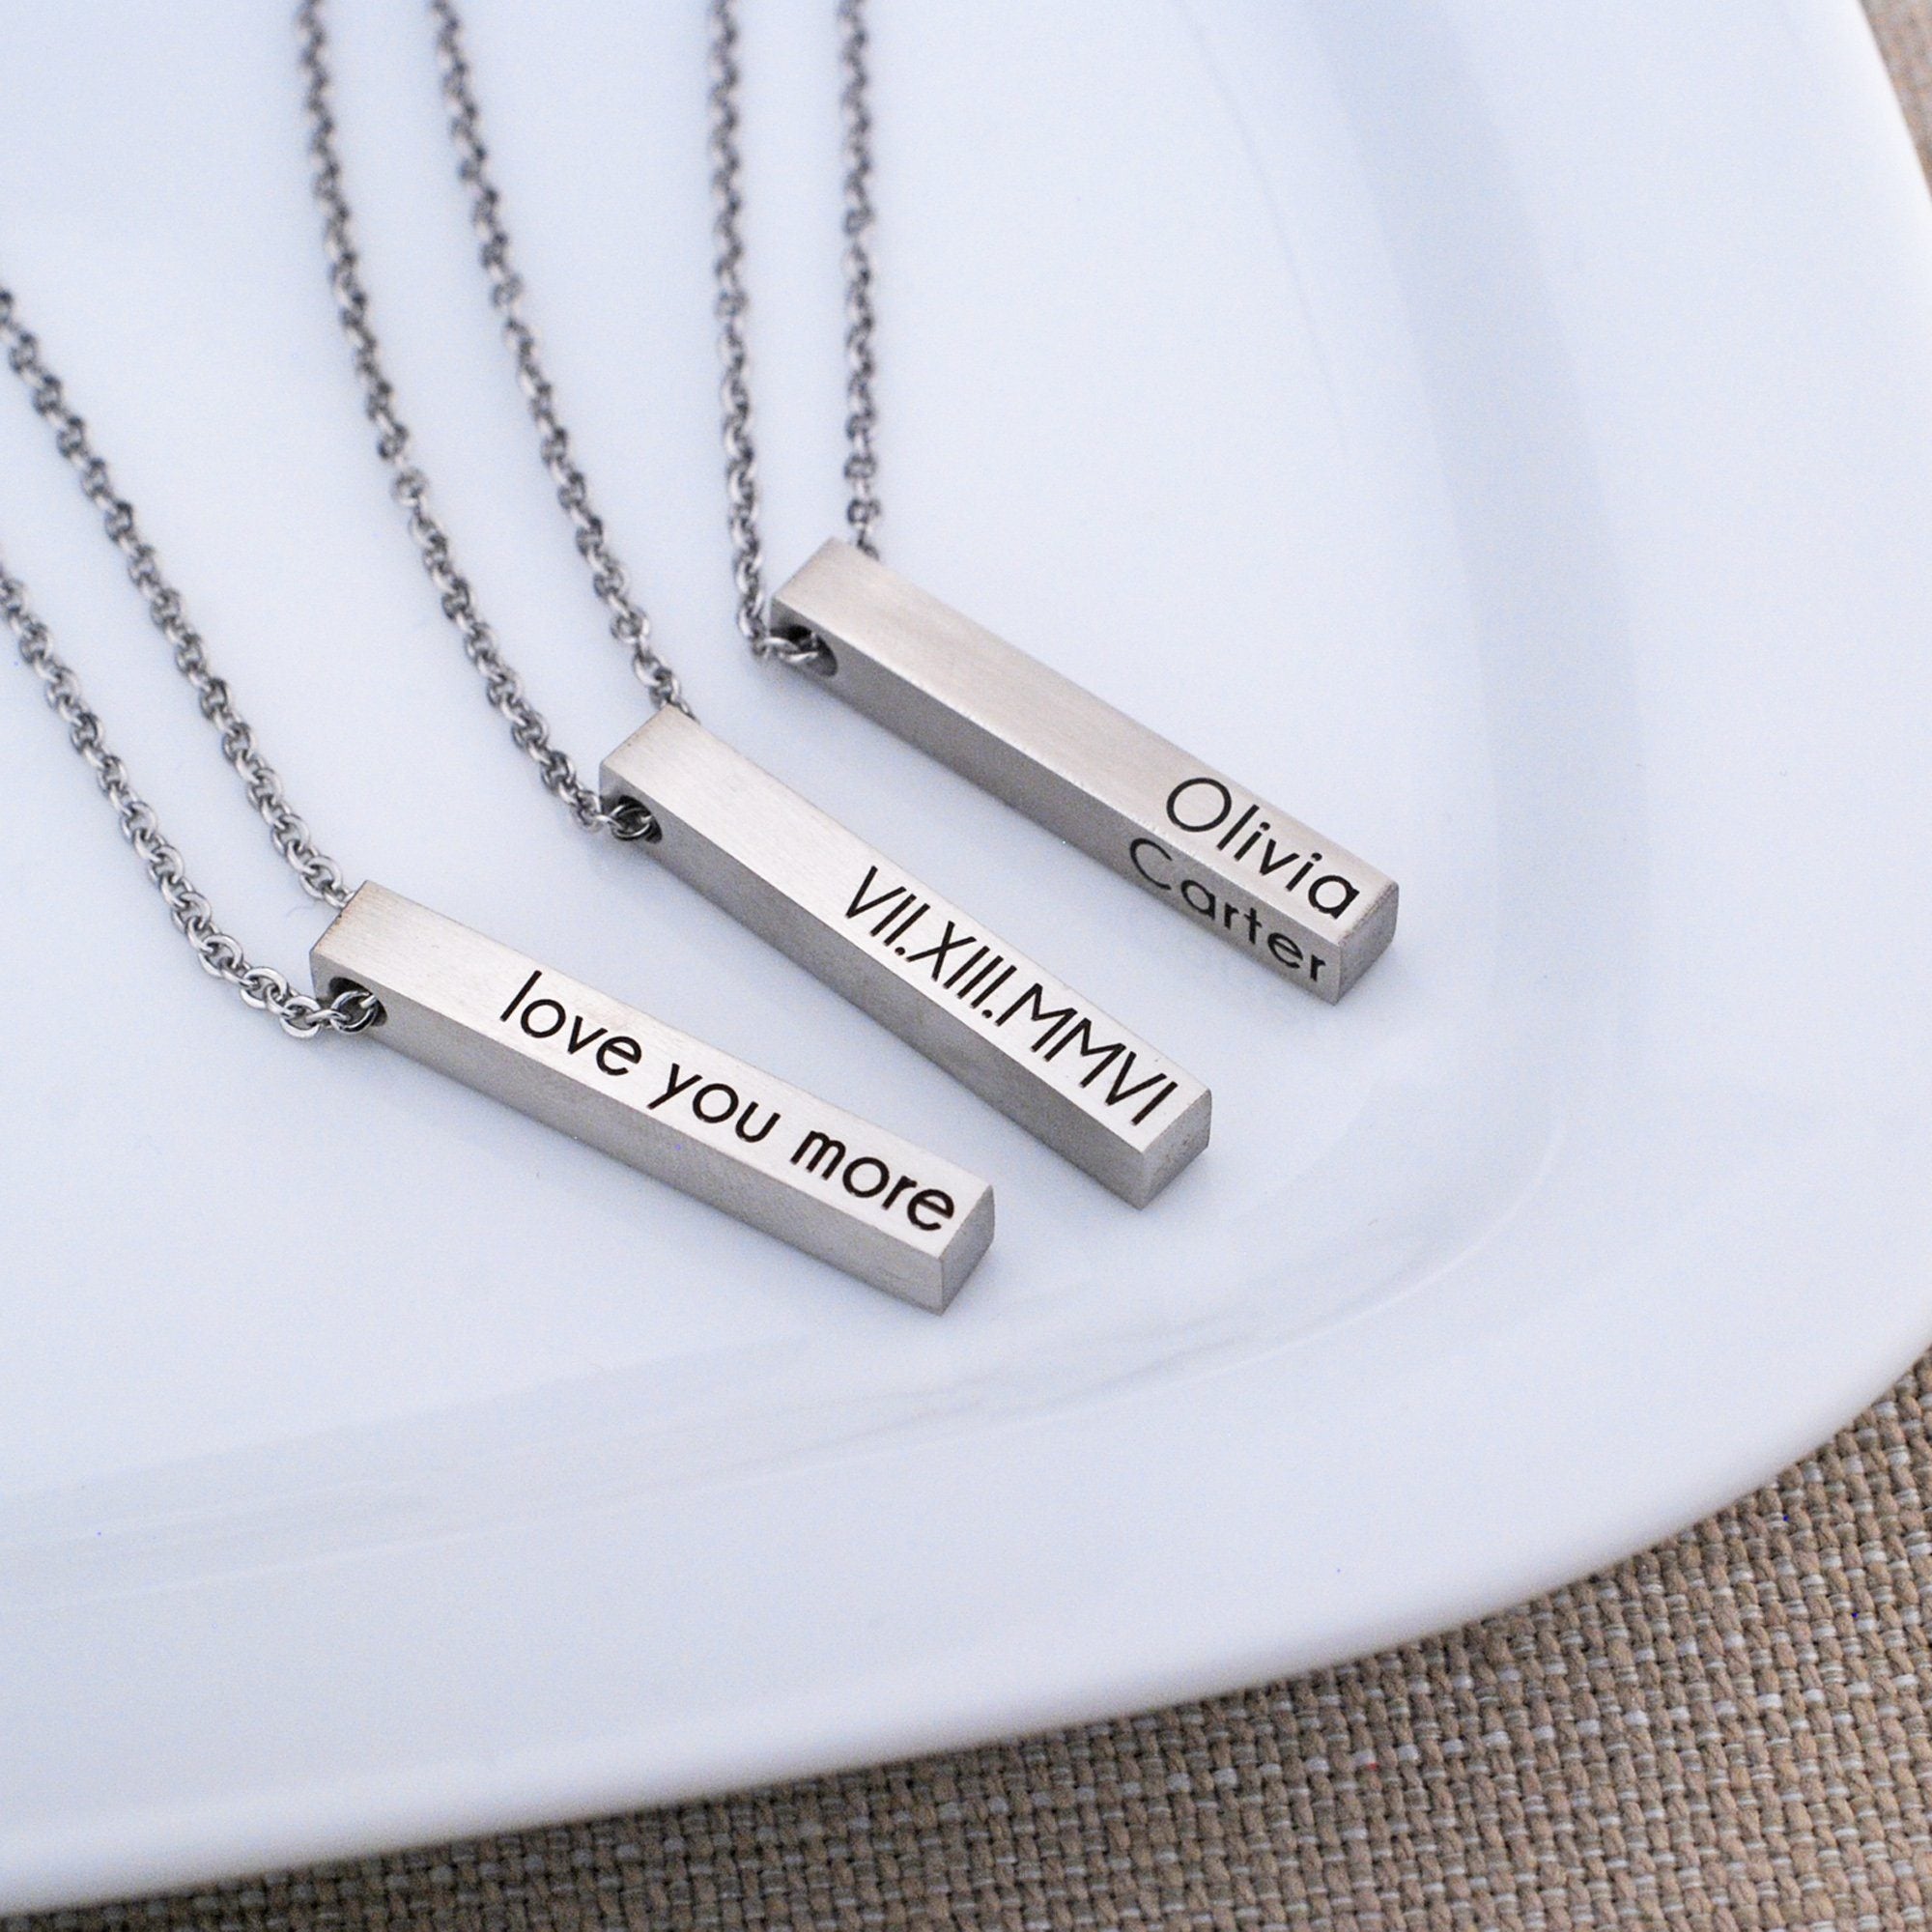 Custom Engraved Necklaces and jewellery – House of Danaus